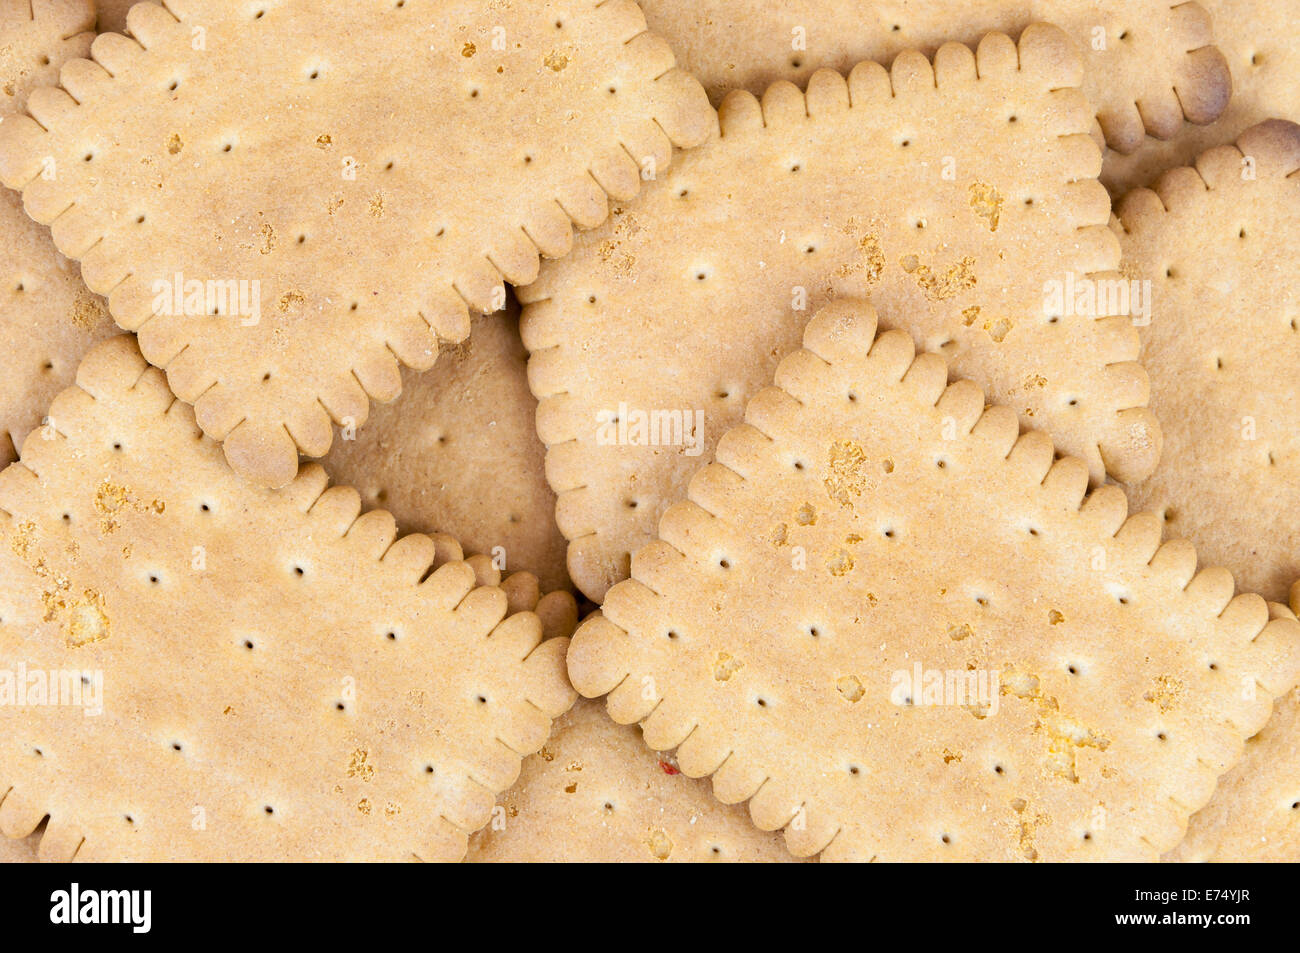 Background made of tasty biscuits. Food texture. Stock Photo